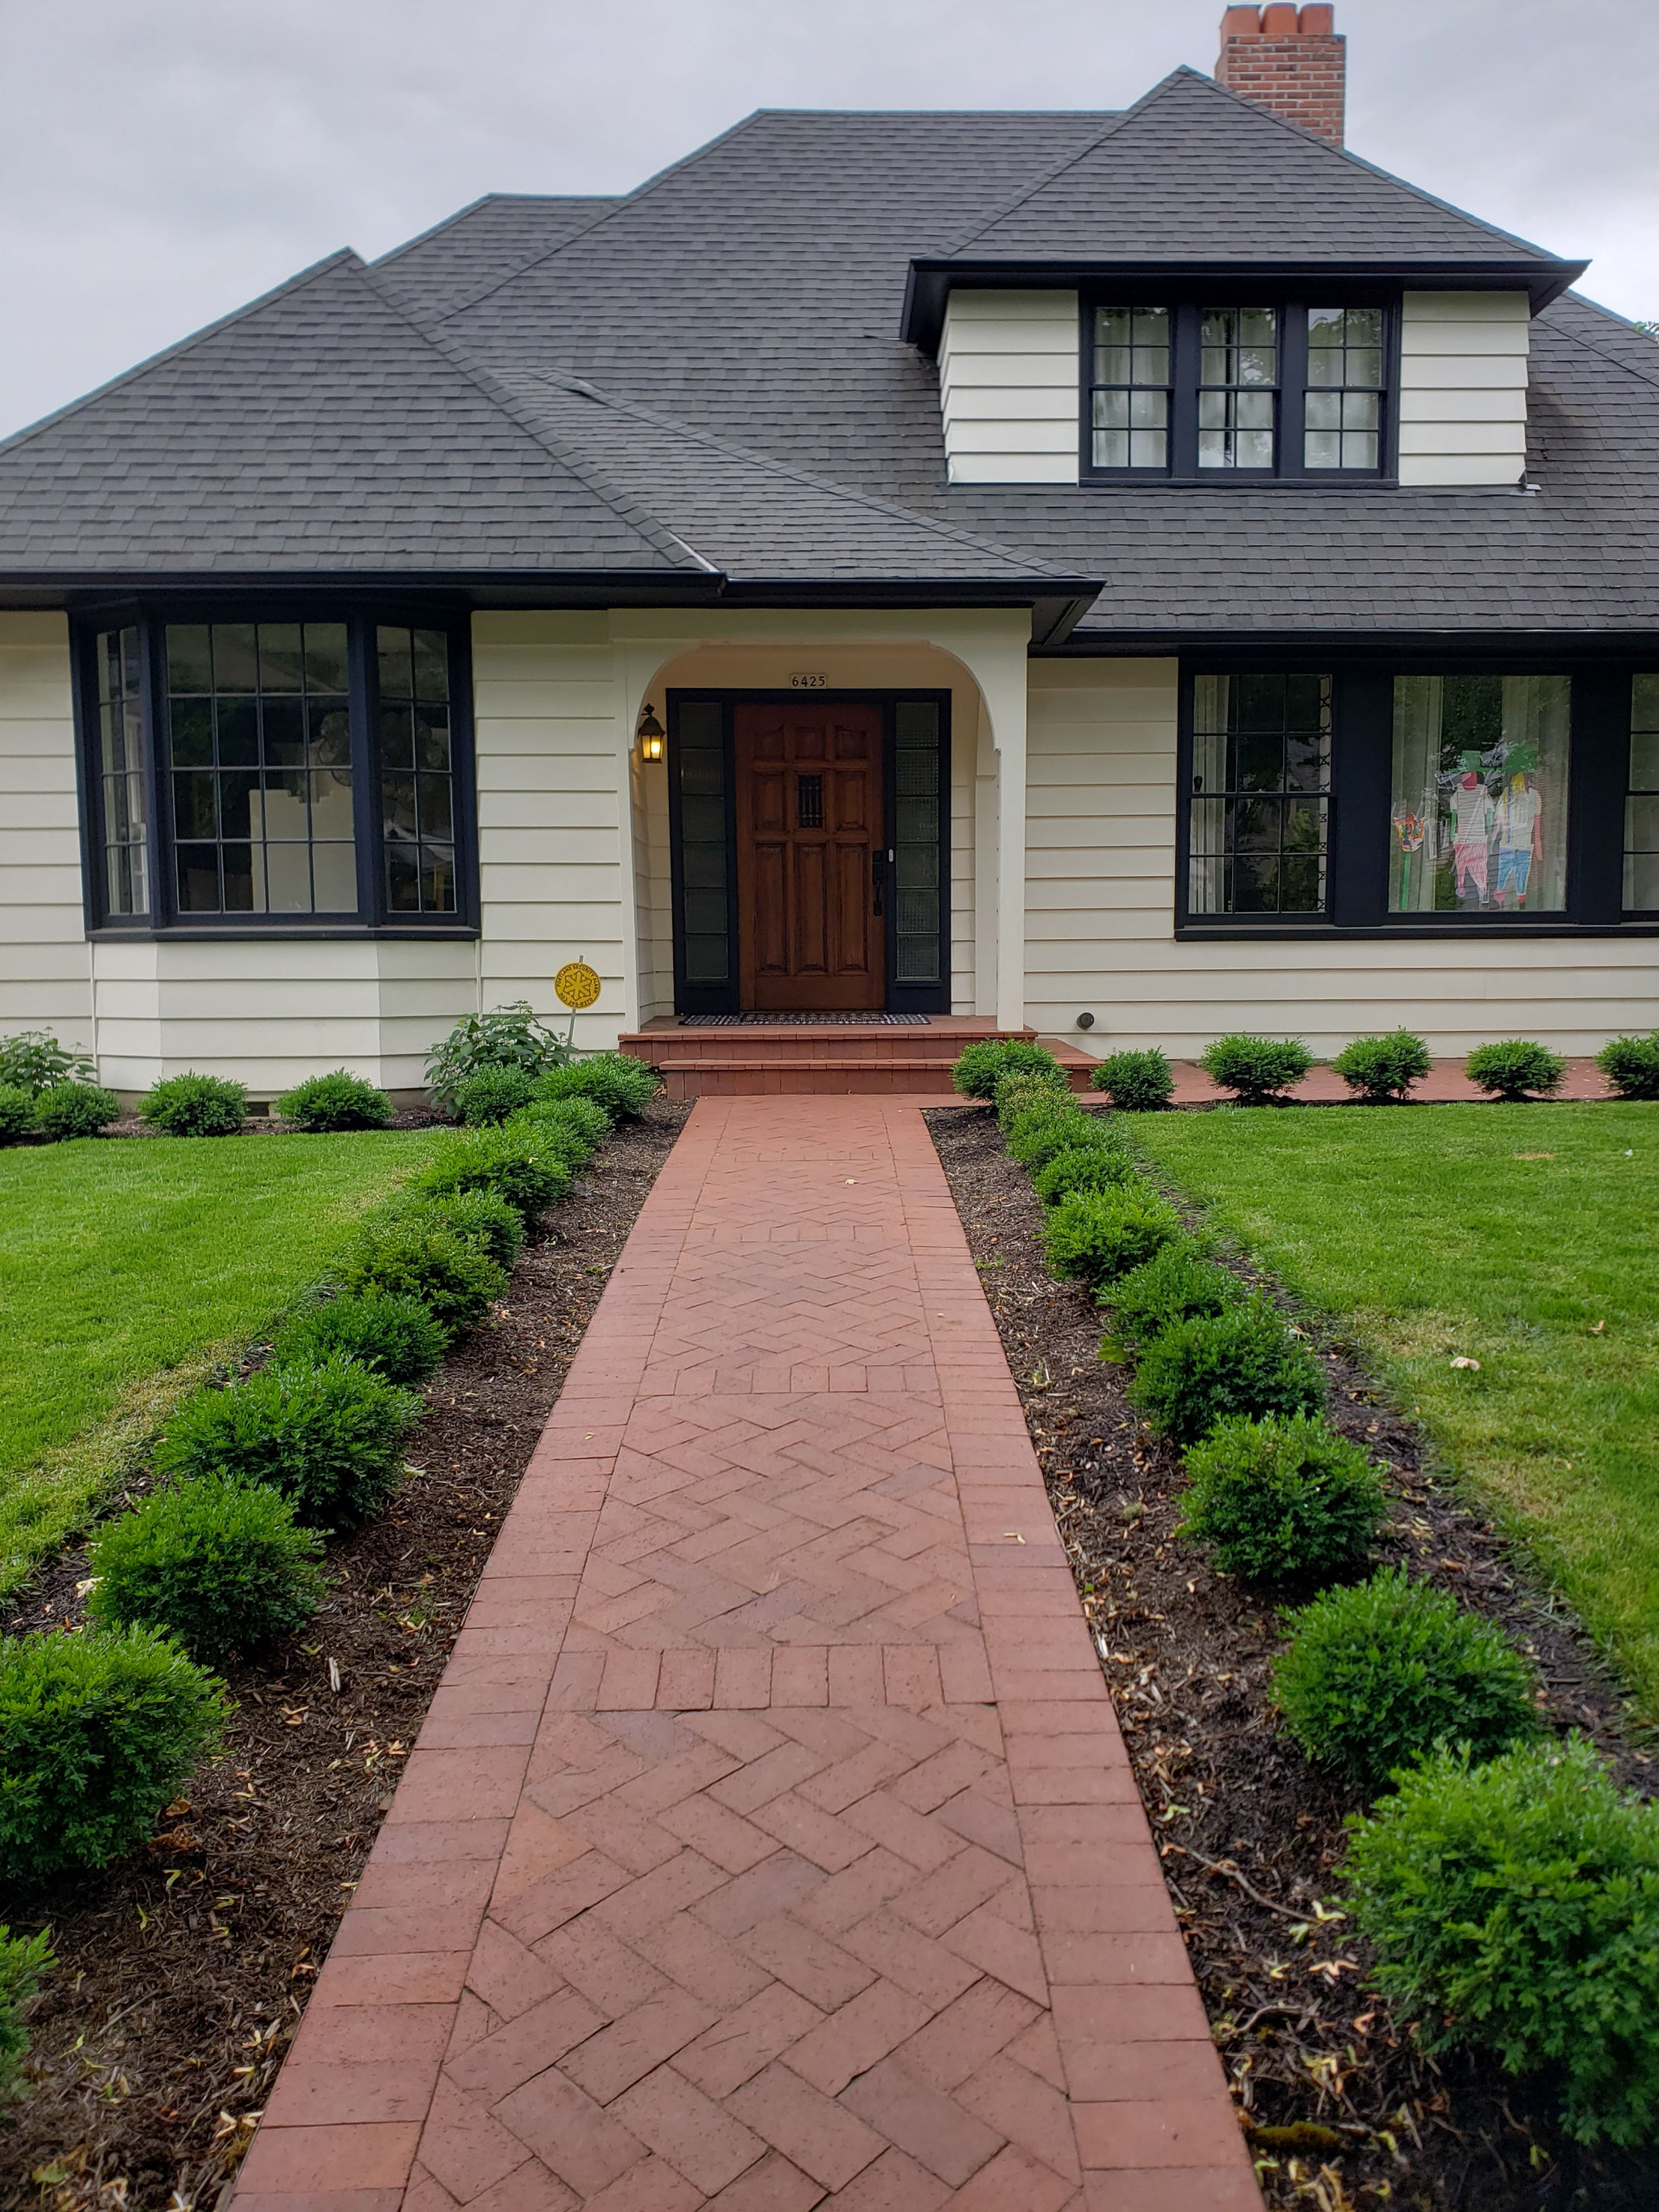 Revamp Your Curb Appeal With Stunning Walkway Front Yard Landscape Design